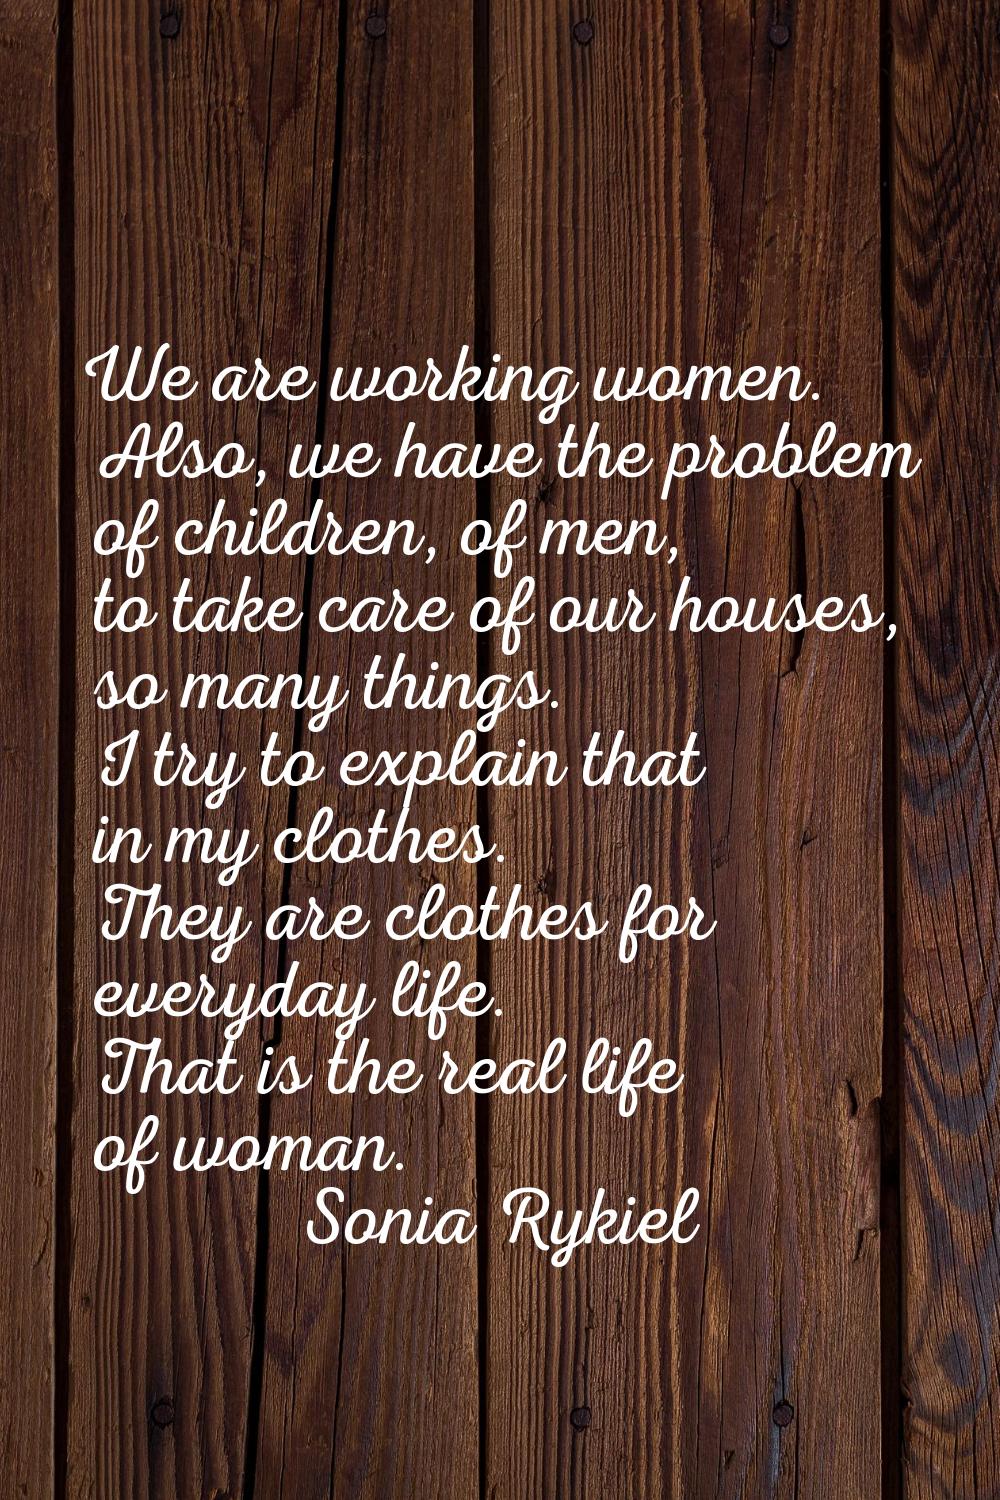 We are working women. Also, we have the problem of children, of men, to take care of our houses, so